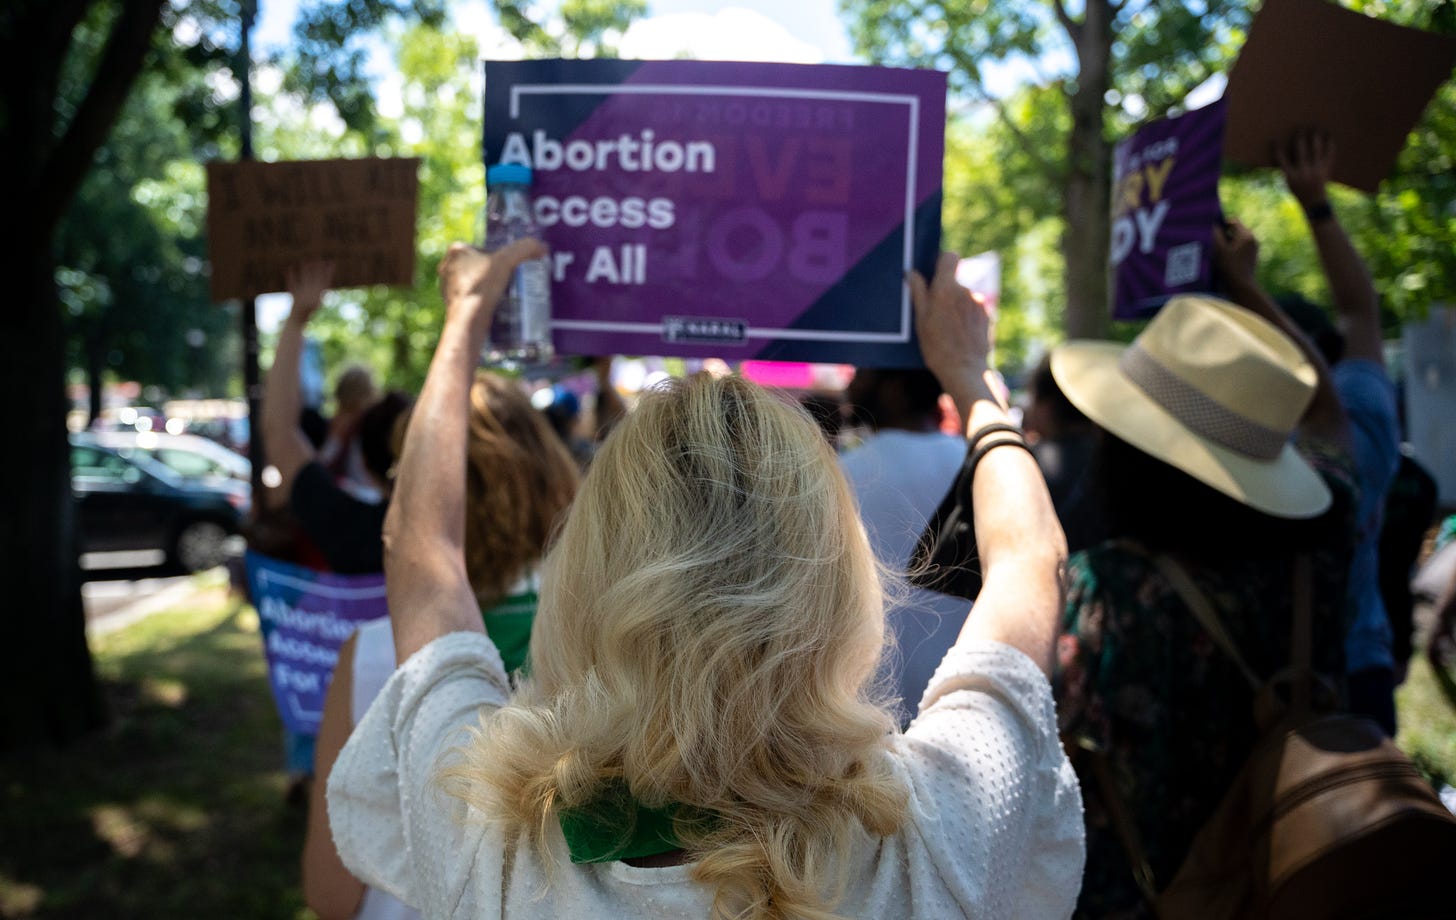 A blond white woman is holding up a sign that says "Abortion Access for All" and marching with other sign holders.